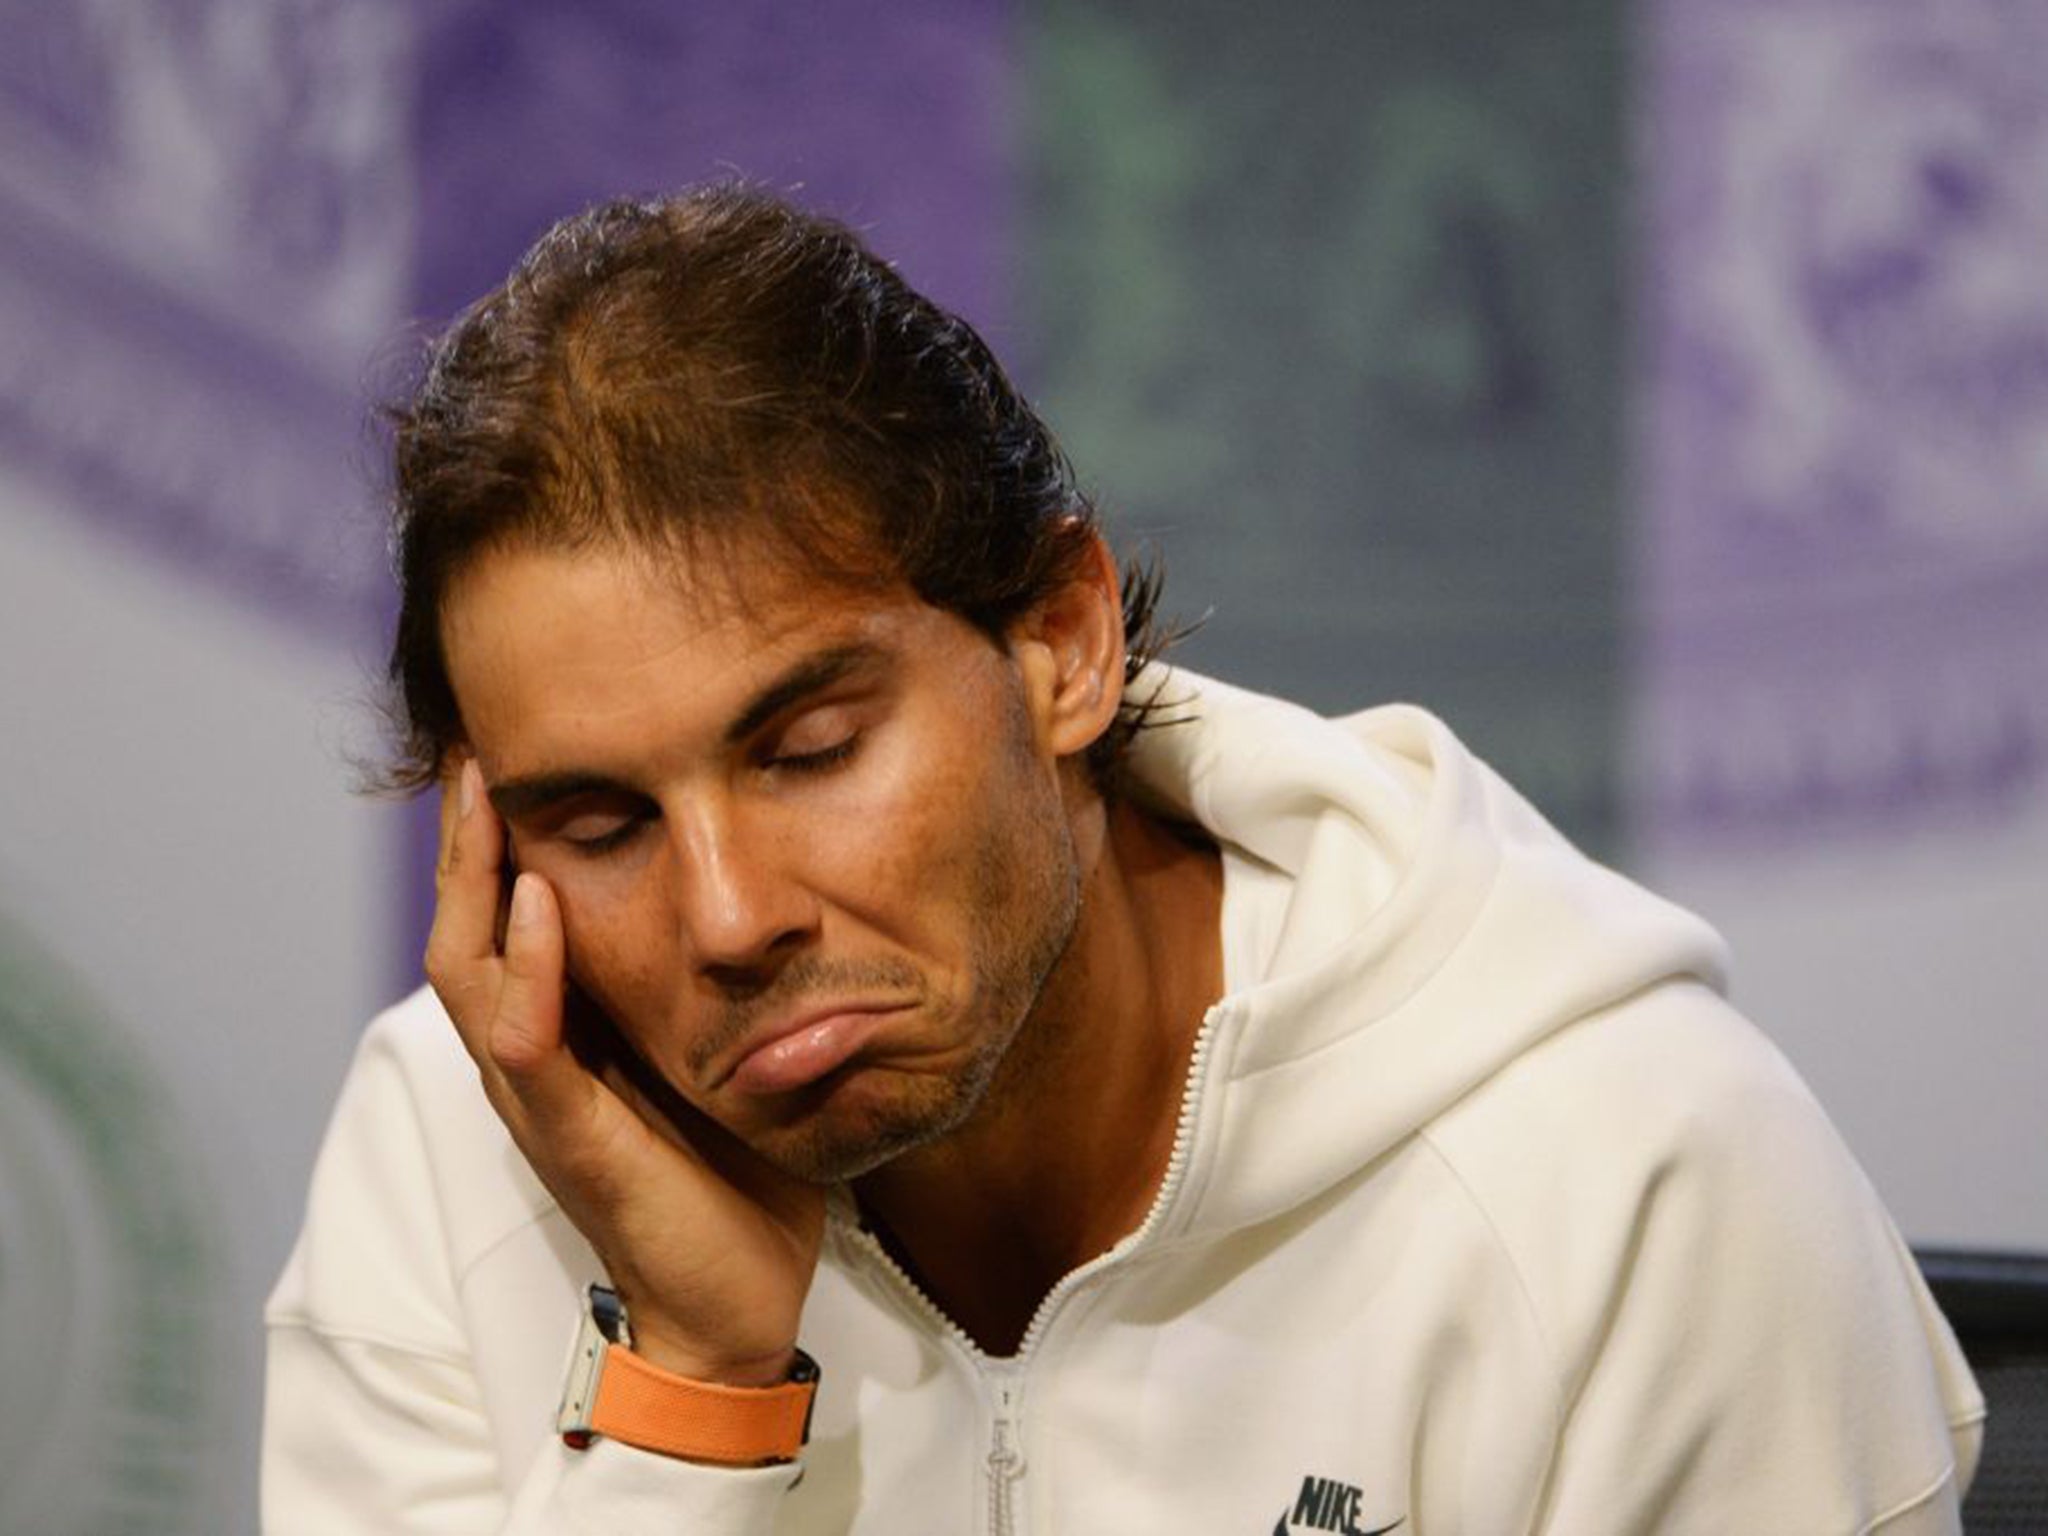 Rafael Nadal is down and out, beaten by Dustin Brown at Wimbledon – but an era is not thereby ended